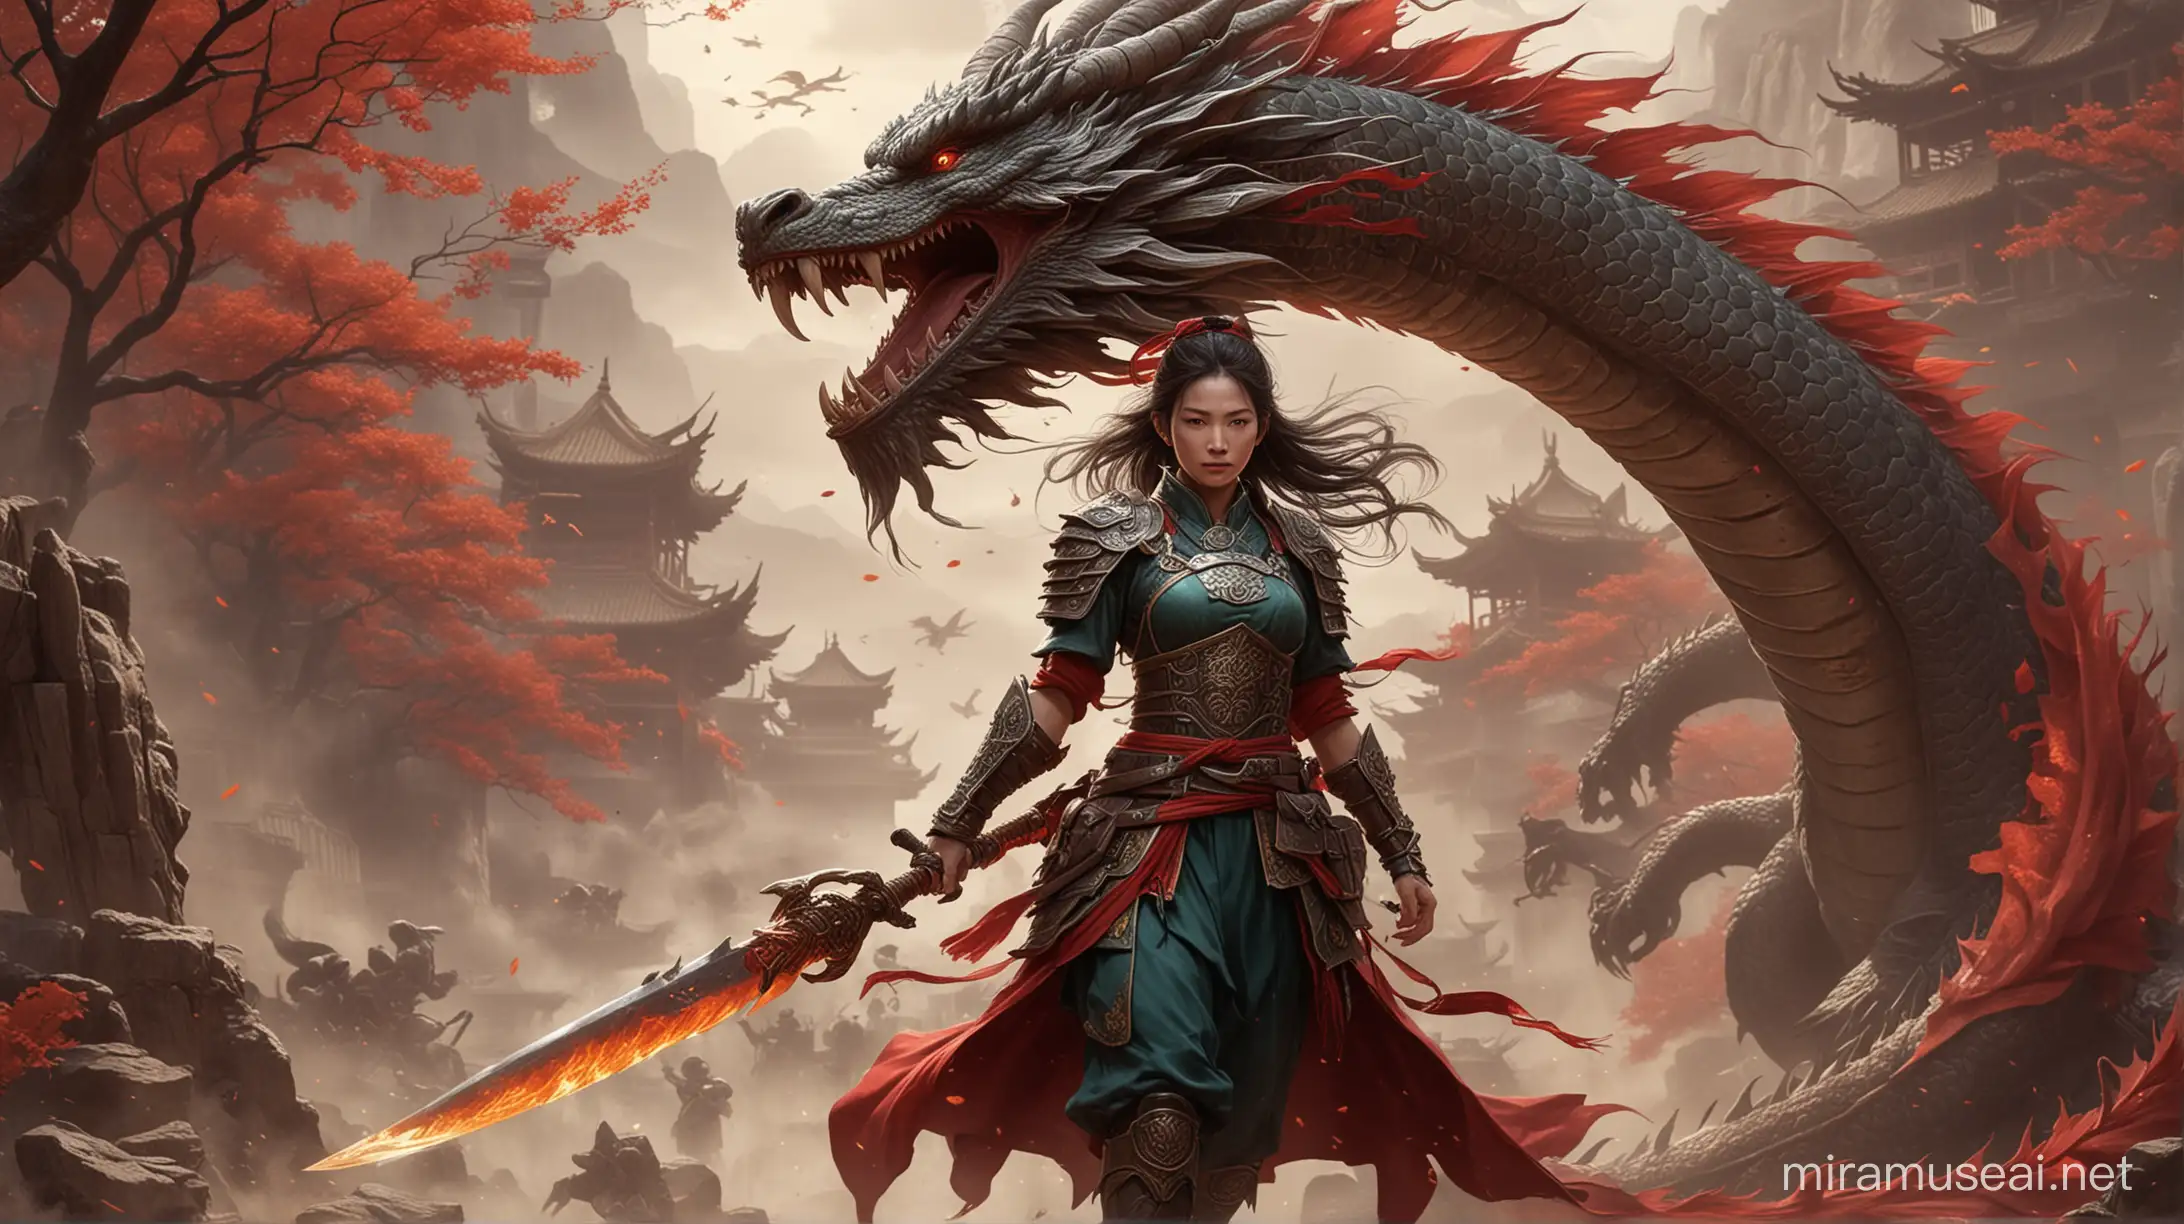 Chinese Warrior Women Battling with a Dragon in Dramatic Cloaked Setting